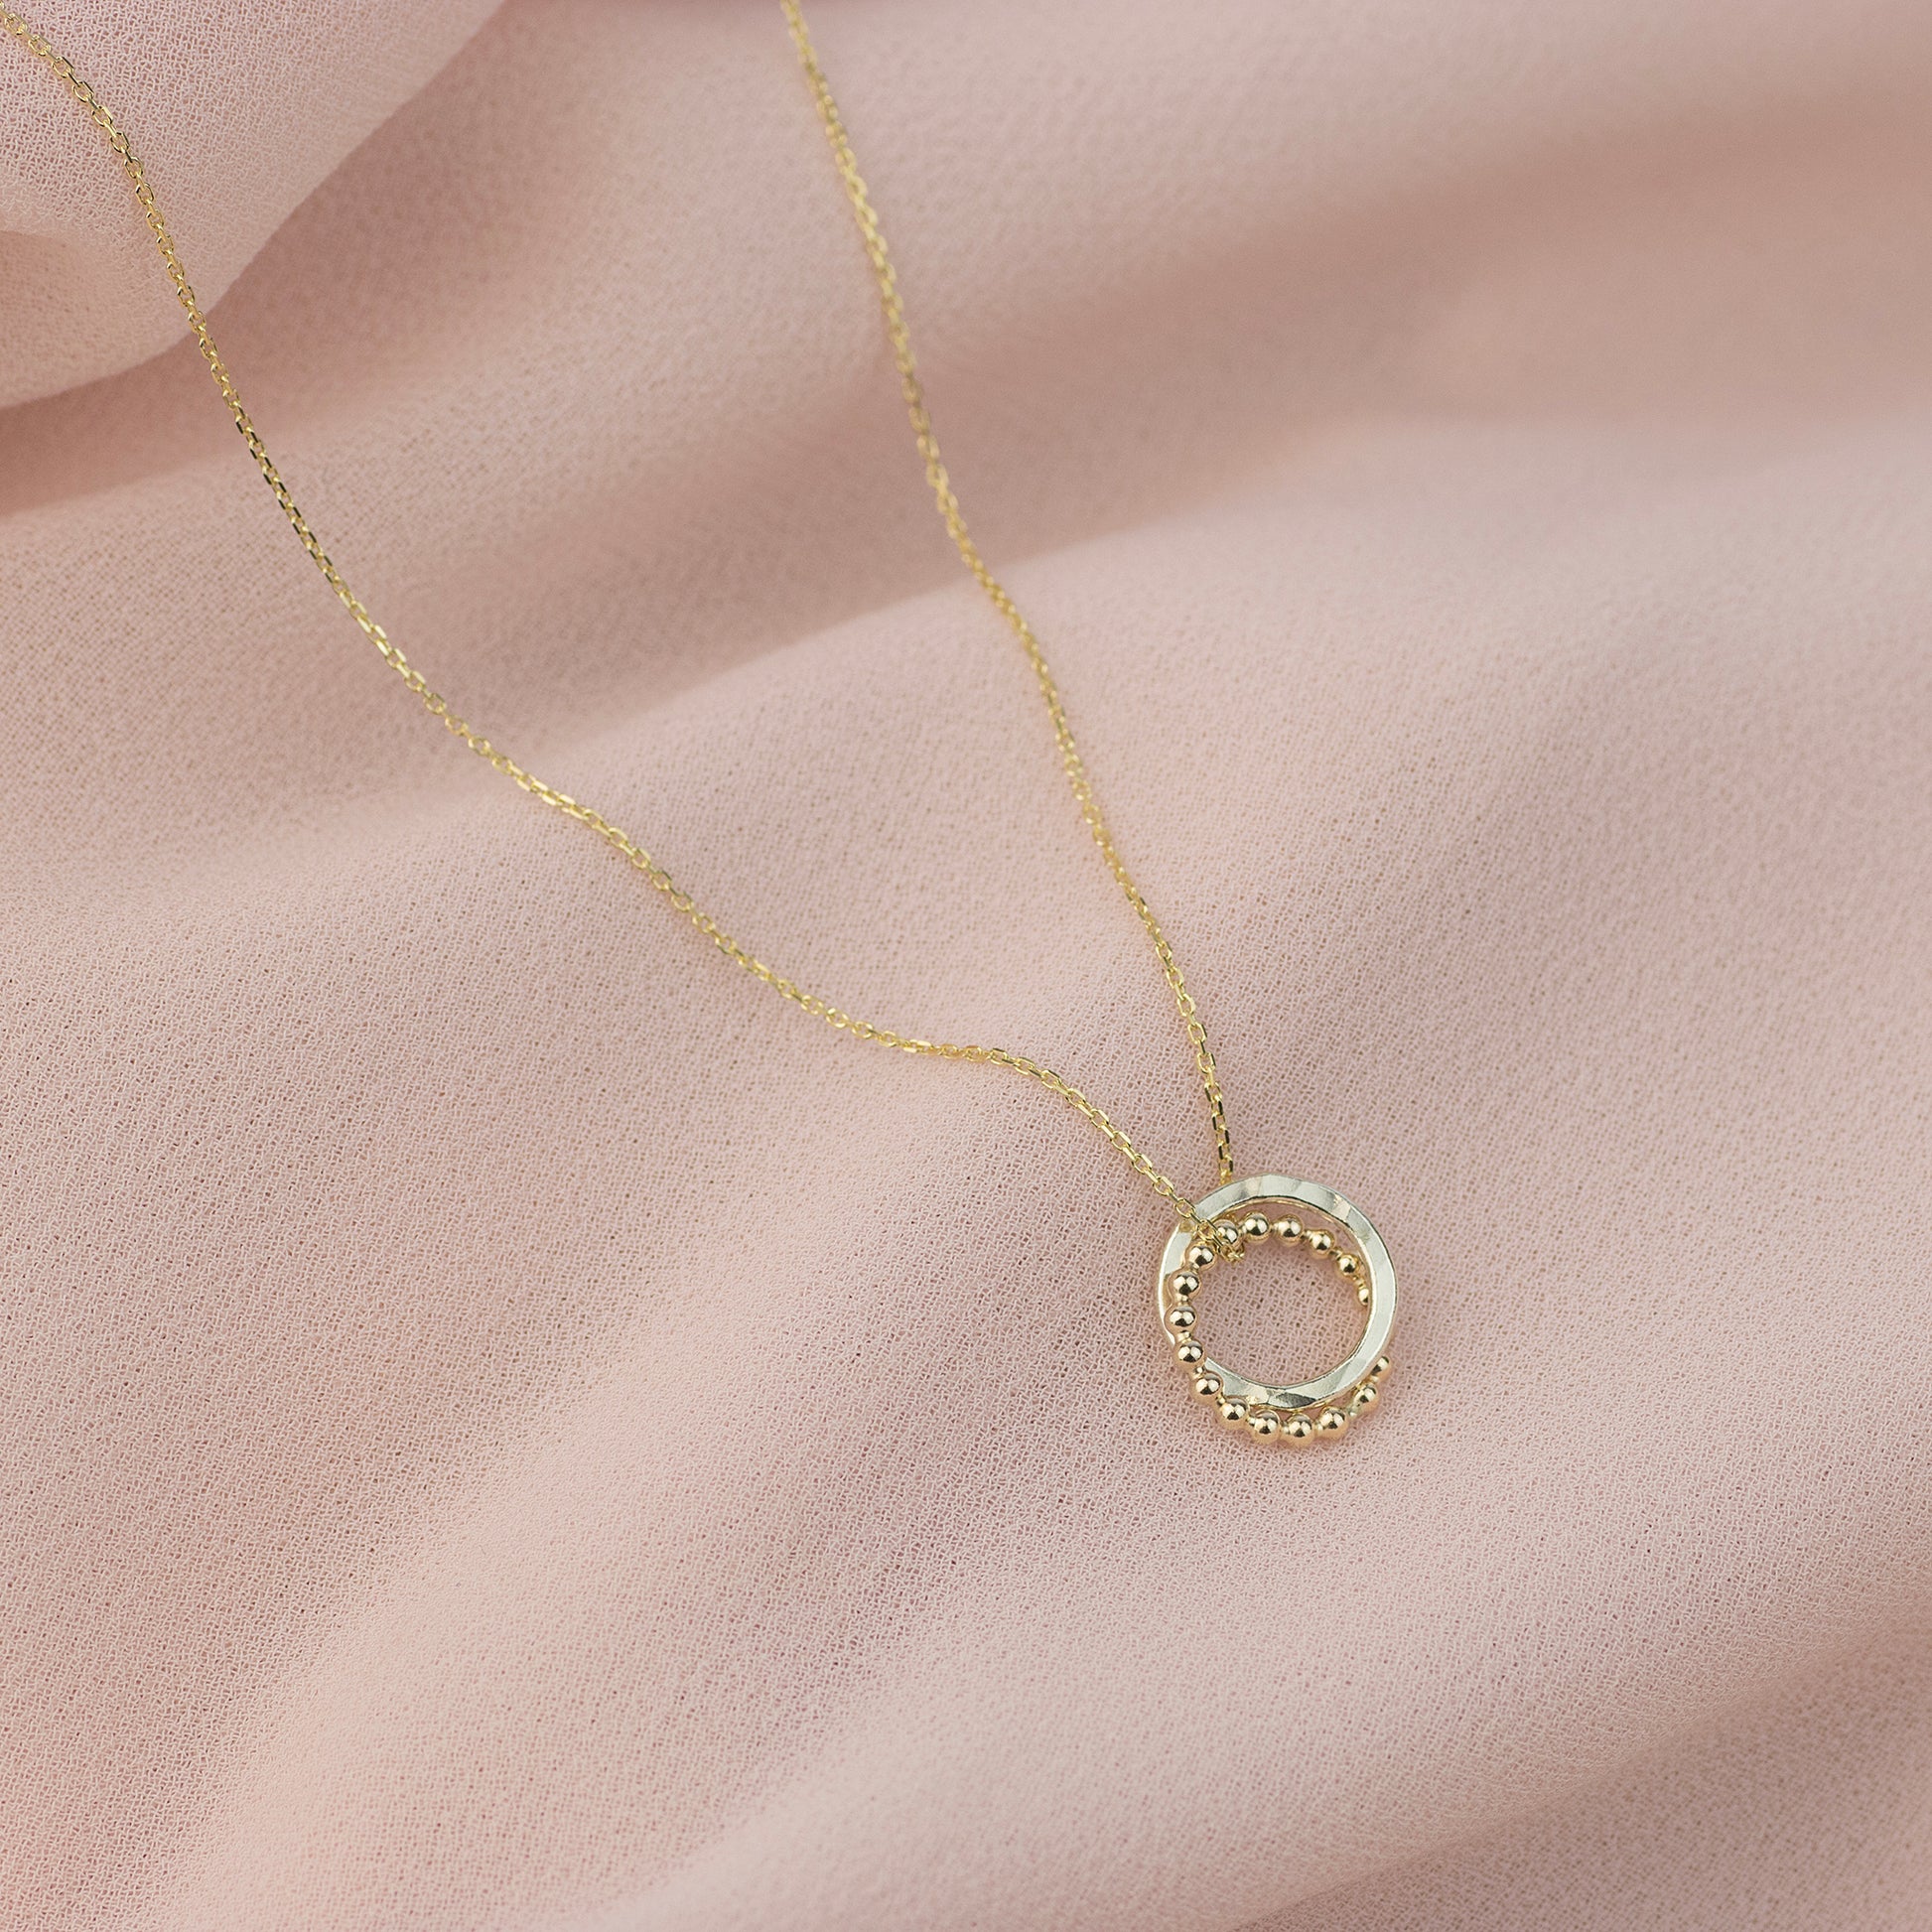 Gift for Goddaughter from Godmother - 9kt Gold & Silver Love Knot Necklace